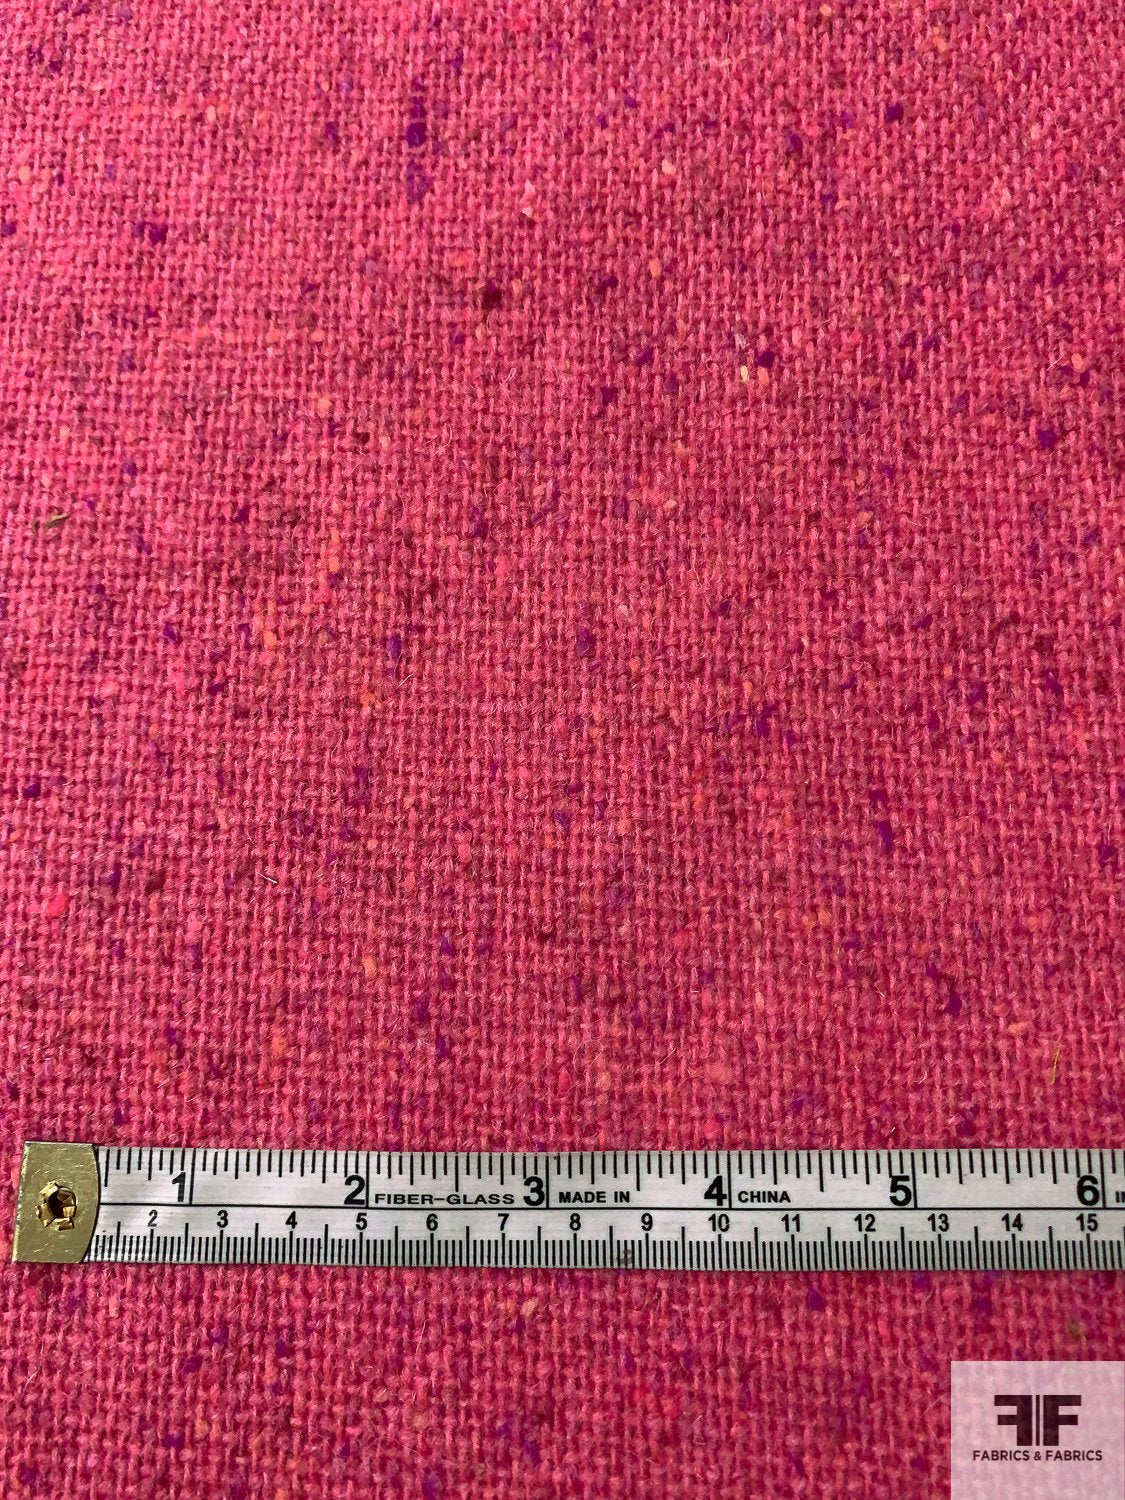 Made in England Speckled Wool Tweed Suiting - Bubblegum Pink / Purple / Salmon